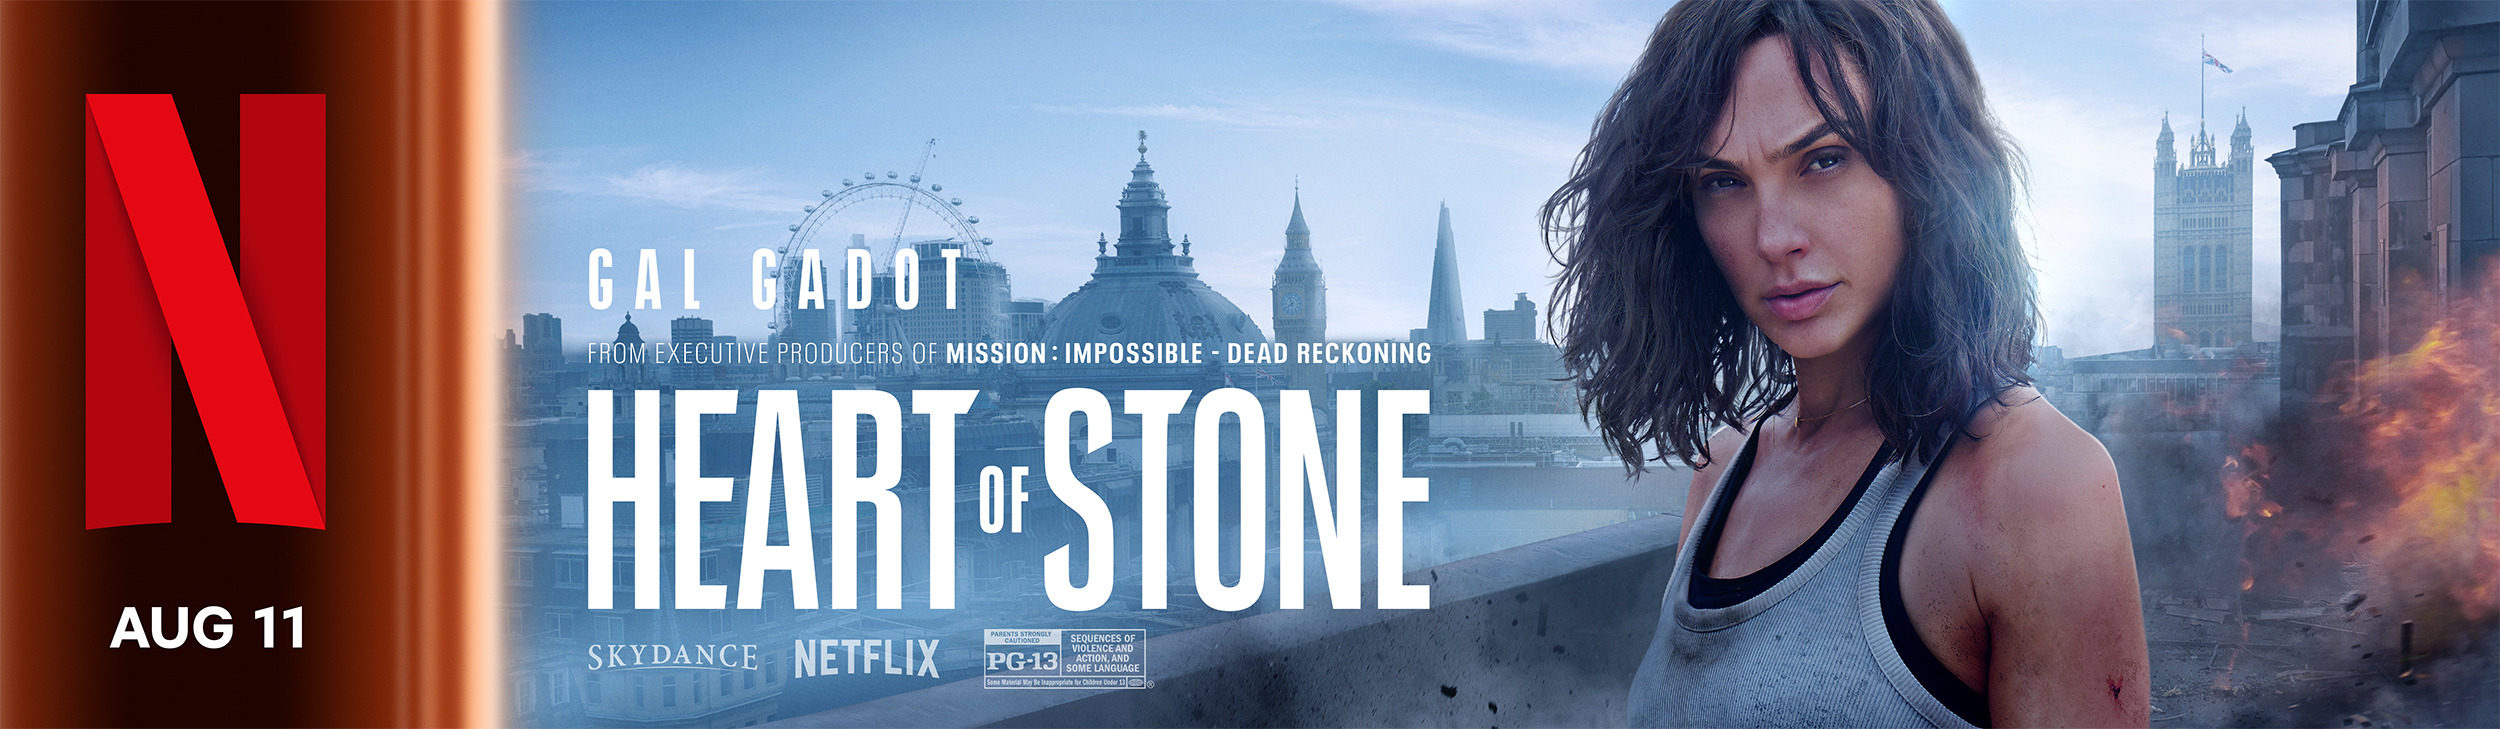 Mega Sized Movie Poster Image for Heart of Stone (#7 of 9)